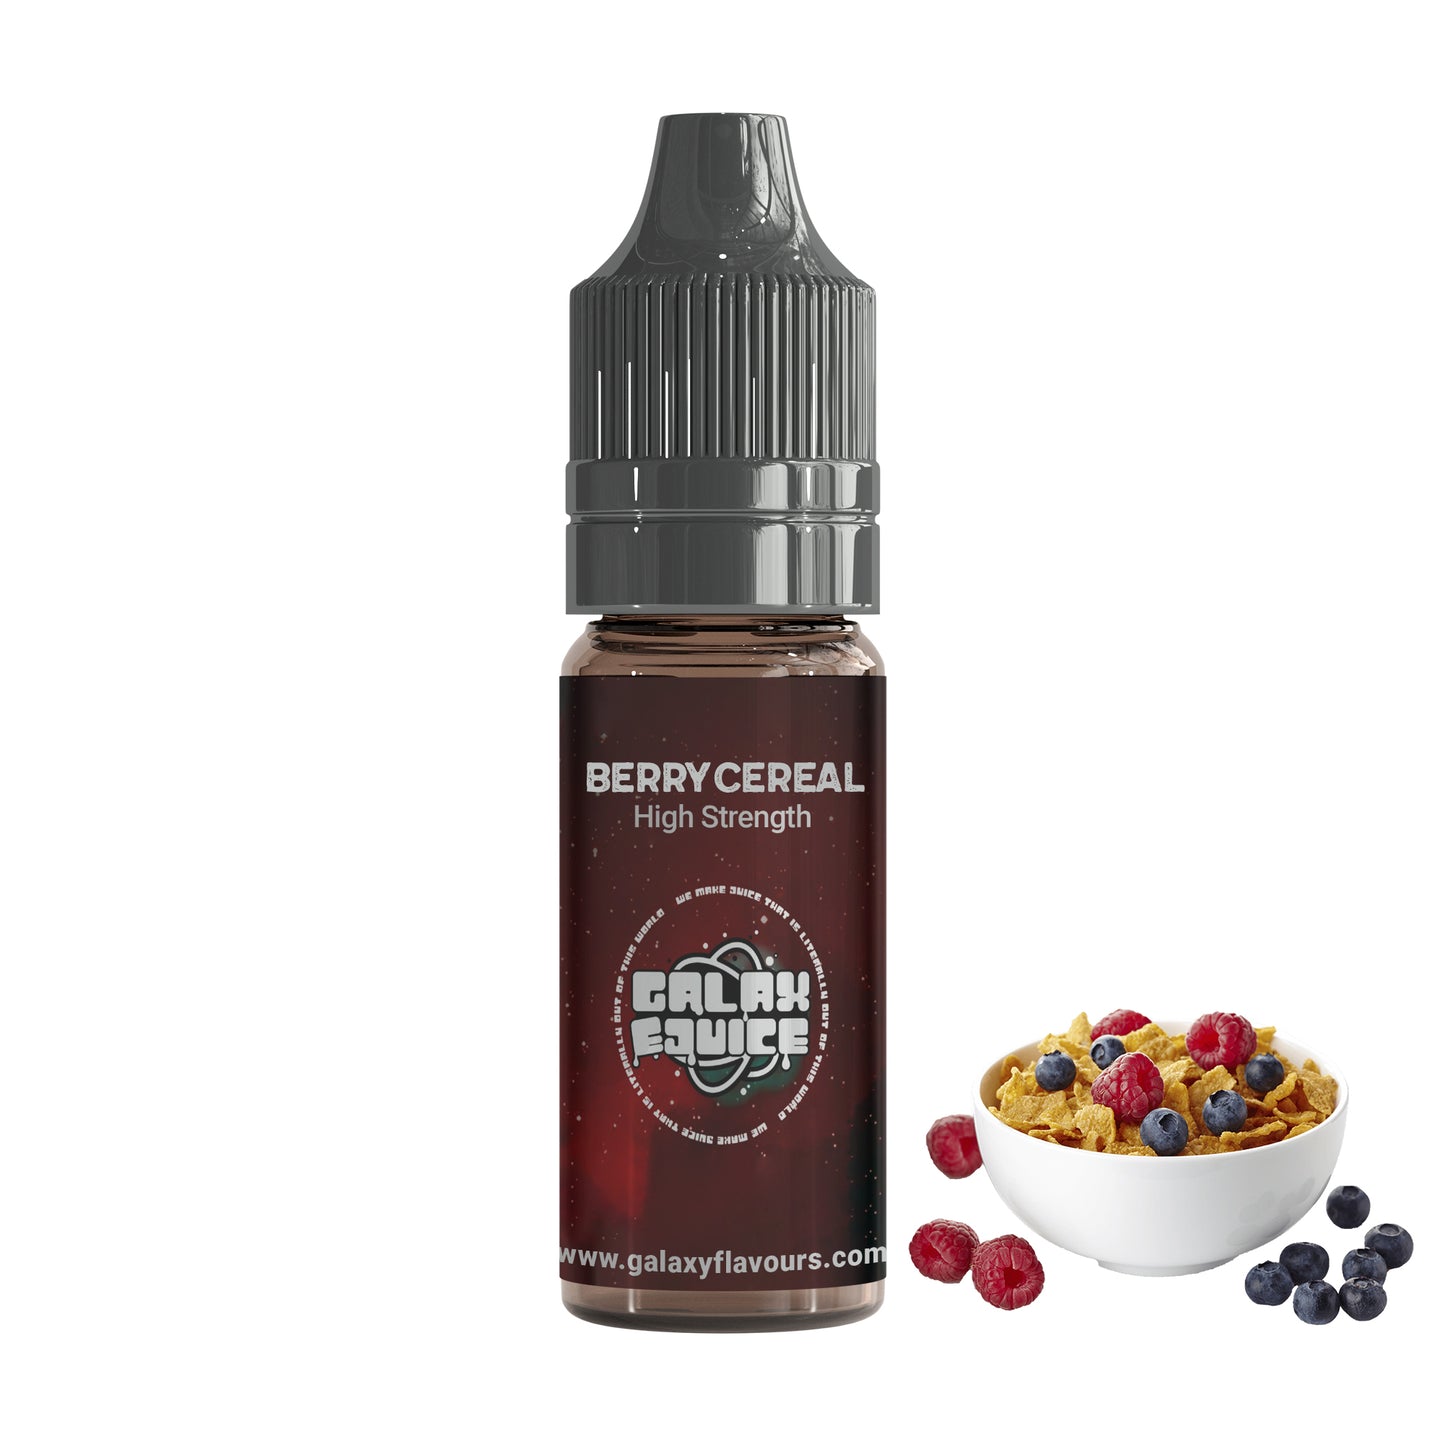 Berry Cereal High Strength Professional Flavouring.